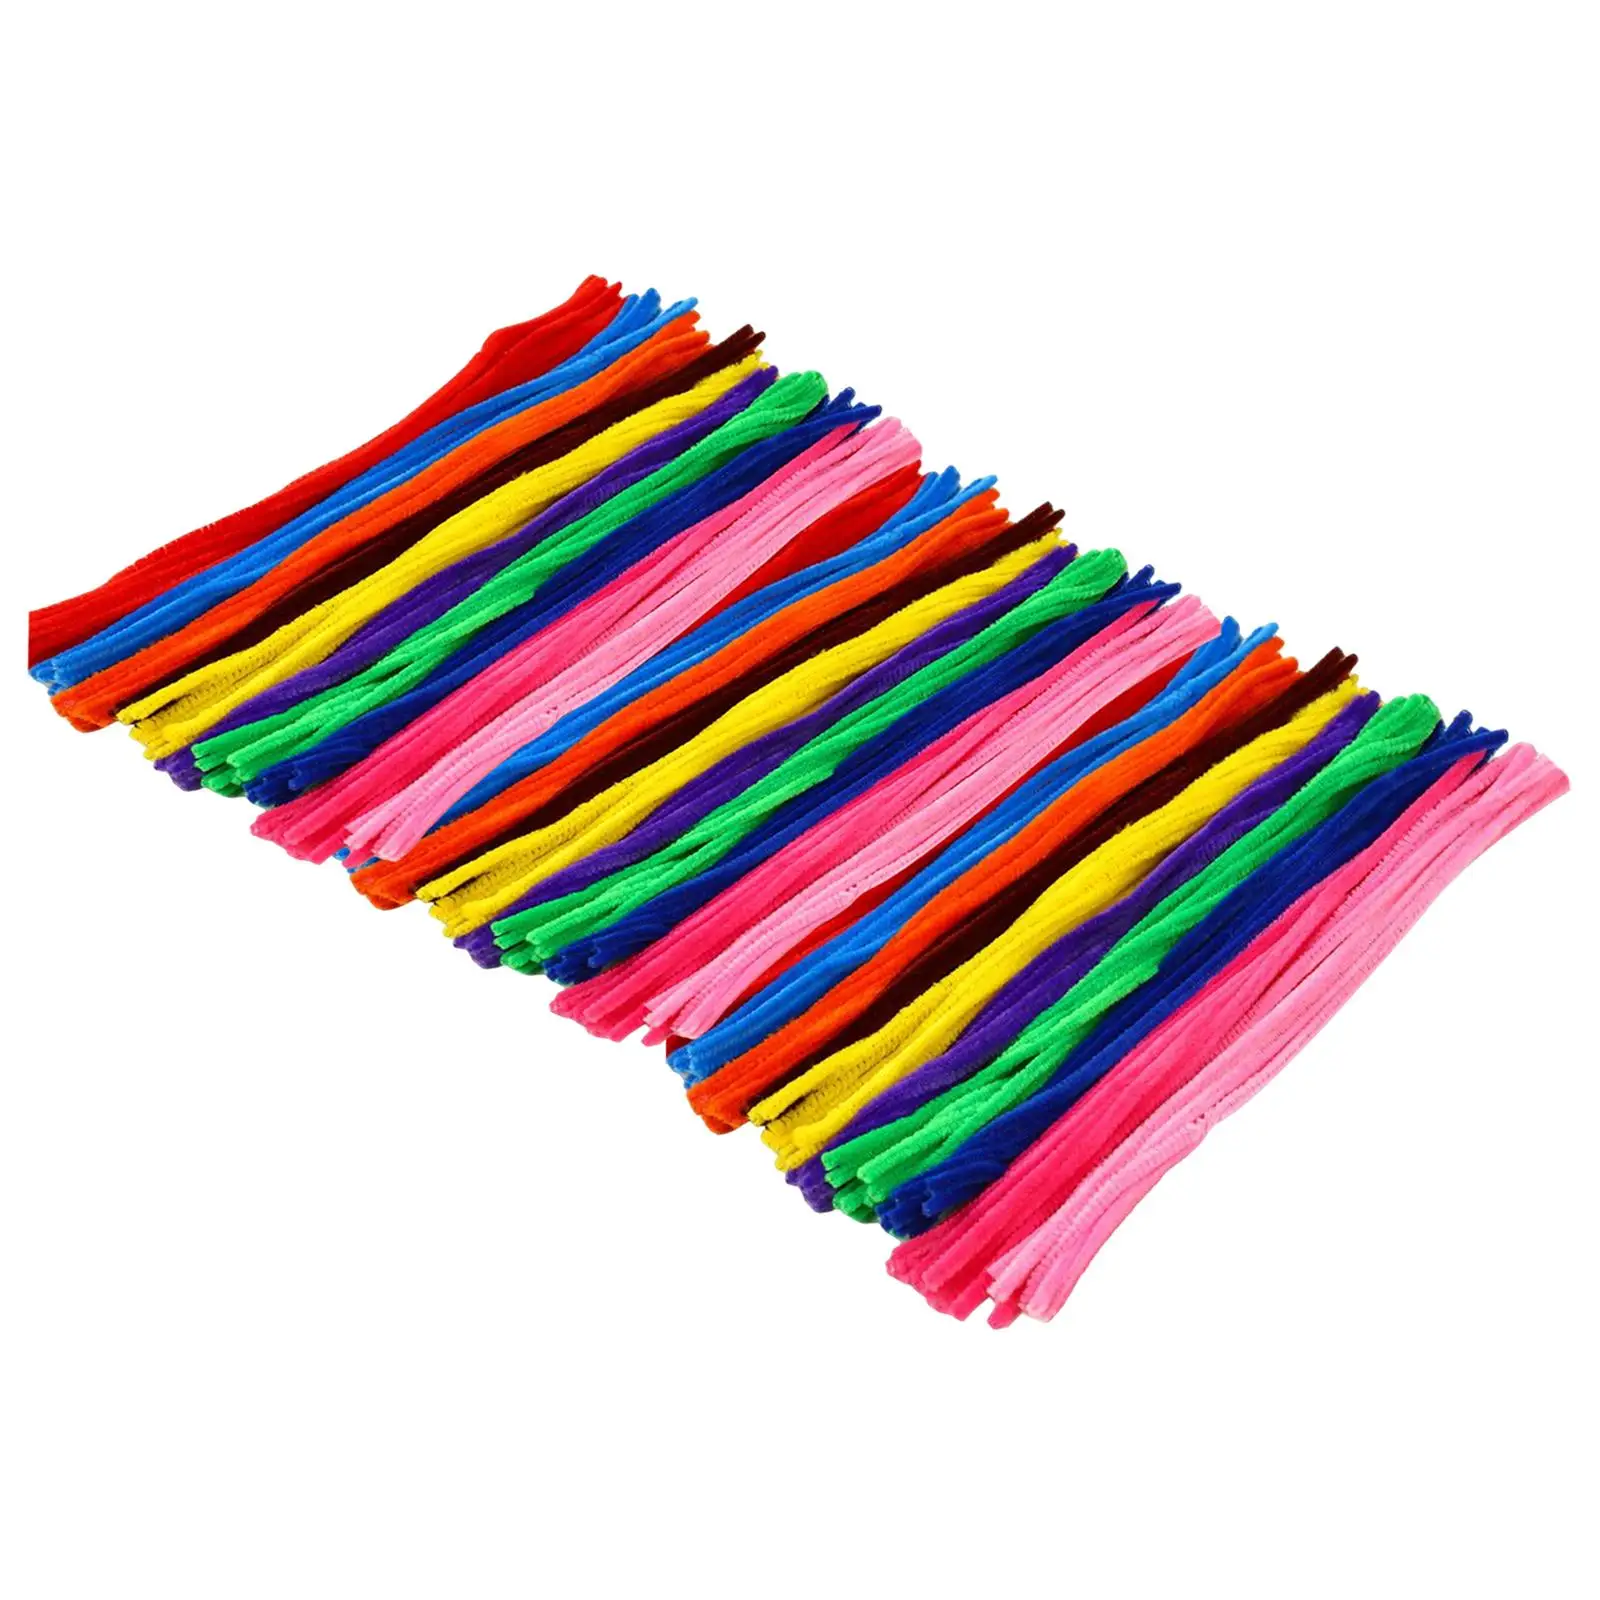 500x Pipe Cleaners Chenille Stems Colorful Arts Craft Handmade for Birthday Supplies